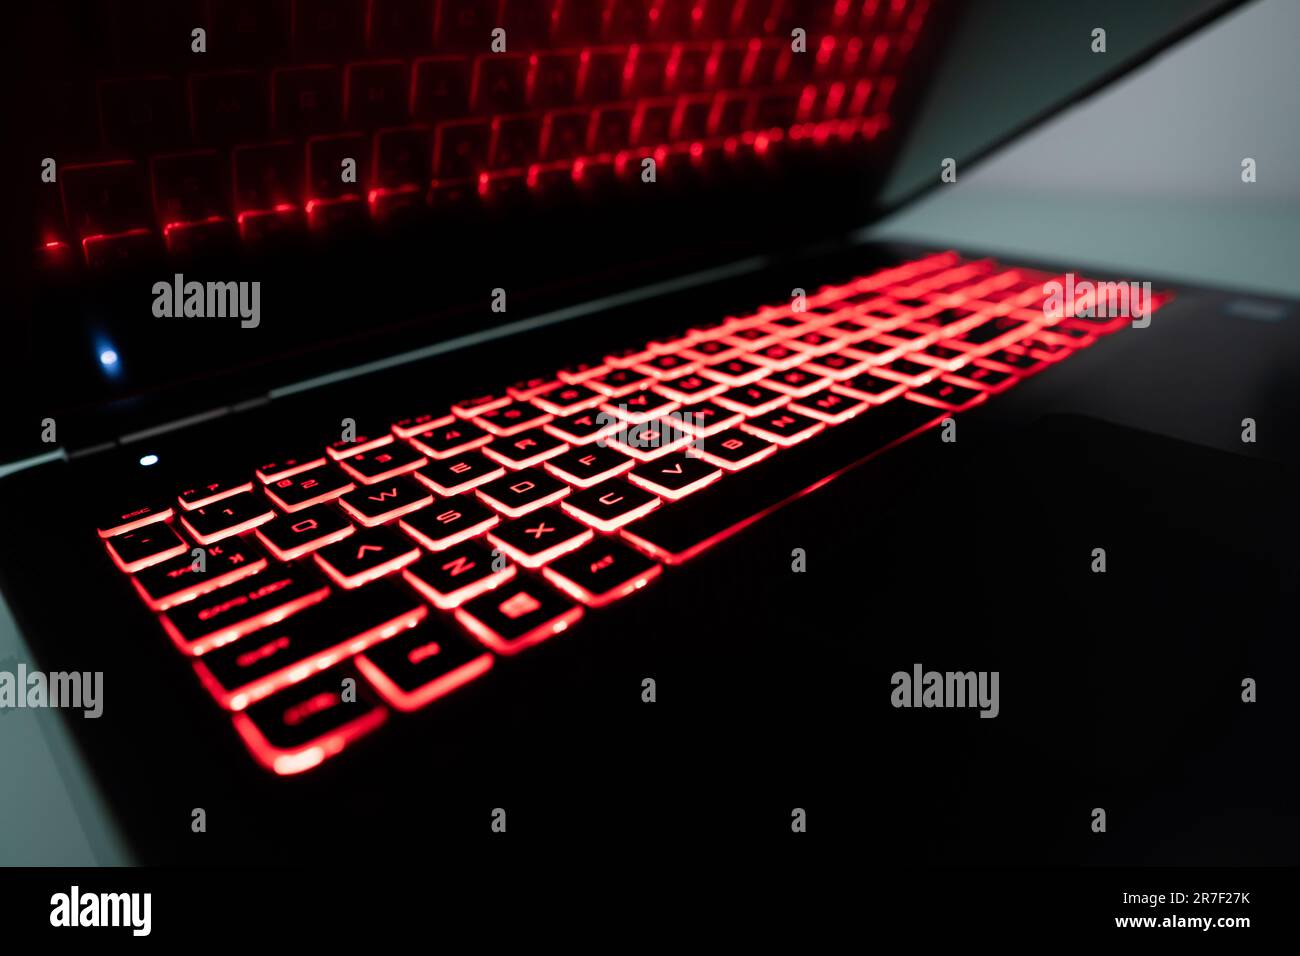 Gaming laptop keyboard with led red light Stock Photo - Alamy